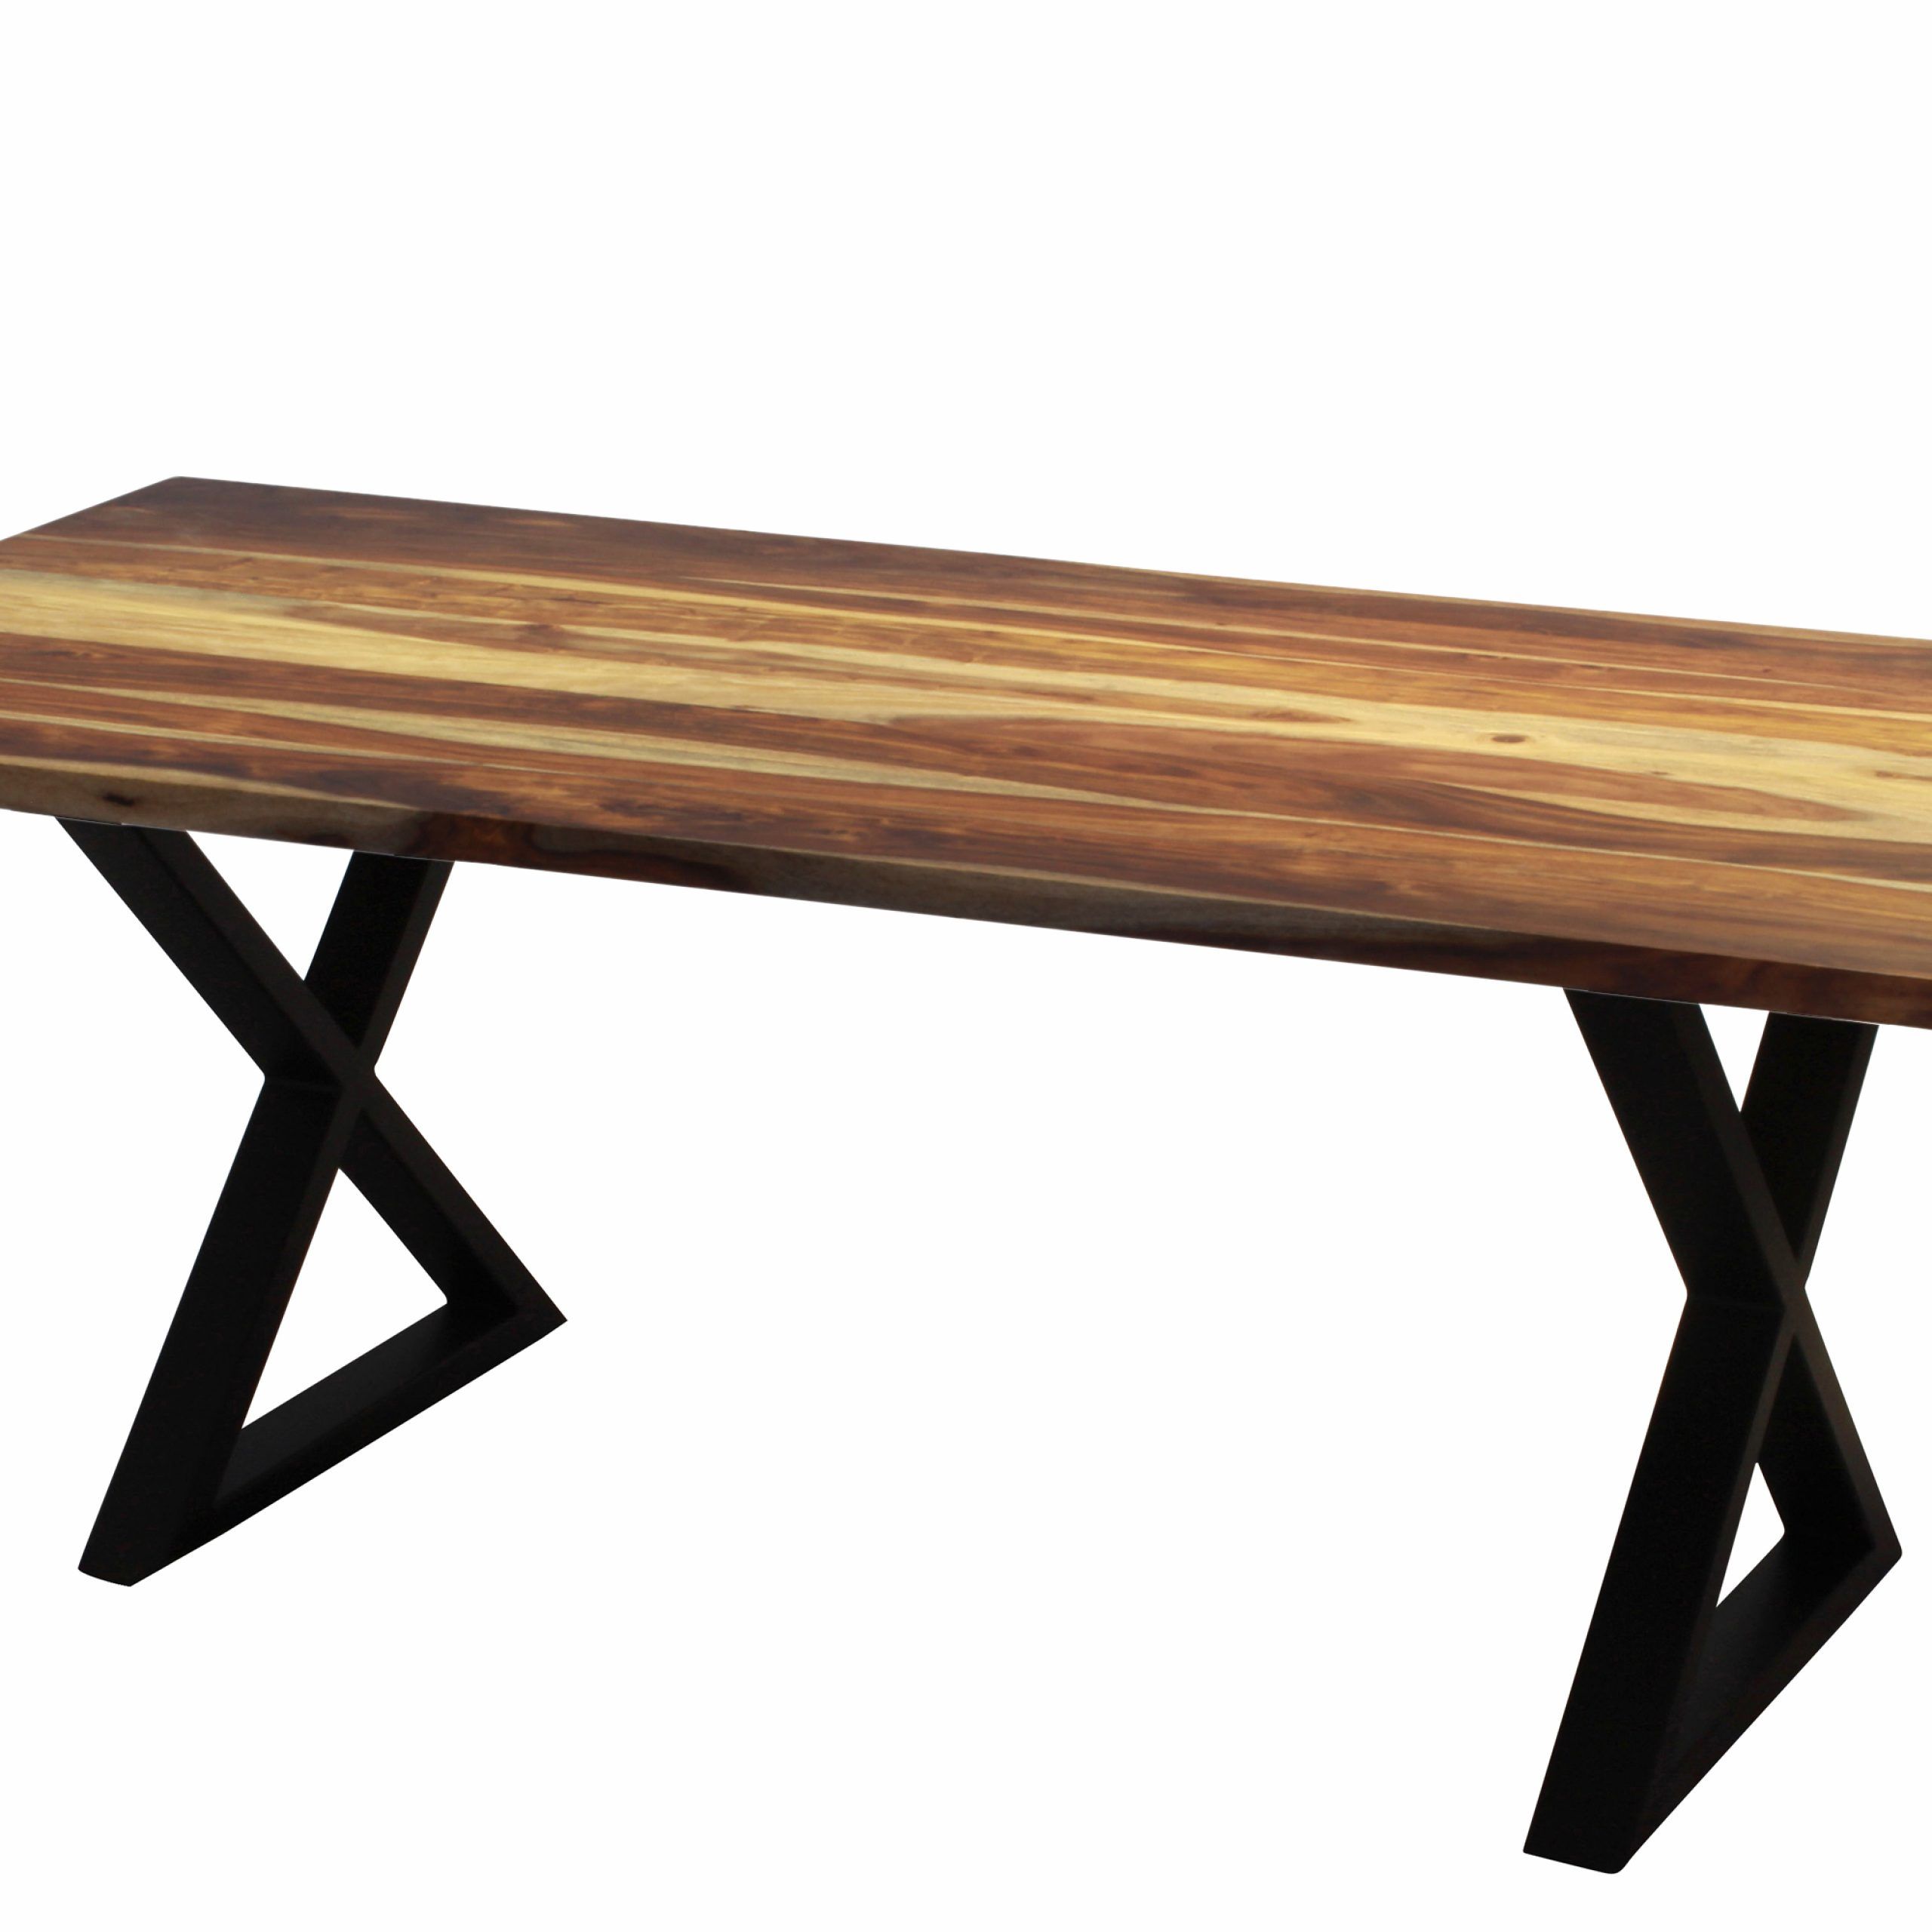 Corcoran Acacia Live Edge Dining Table With Black Victor Legs – 96" Within Recent Acacia Dining Tables With Black Victor Legs (View 4 of 30)